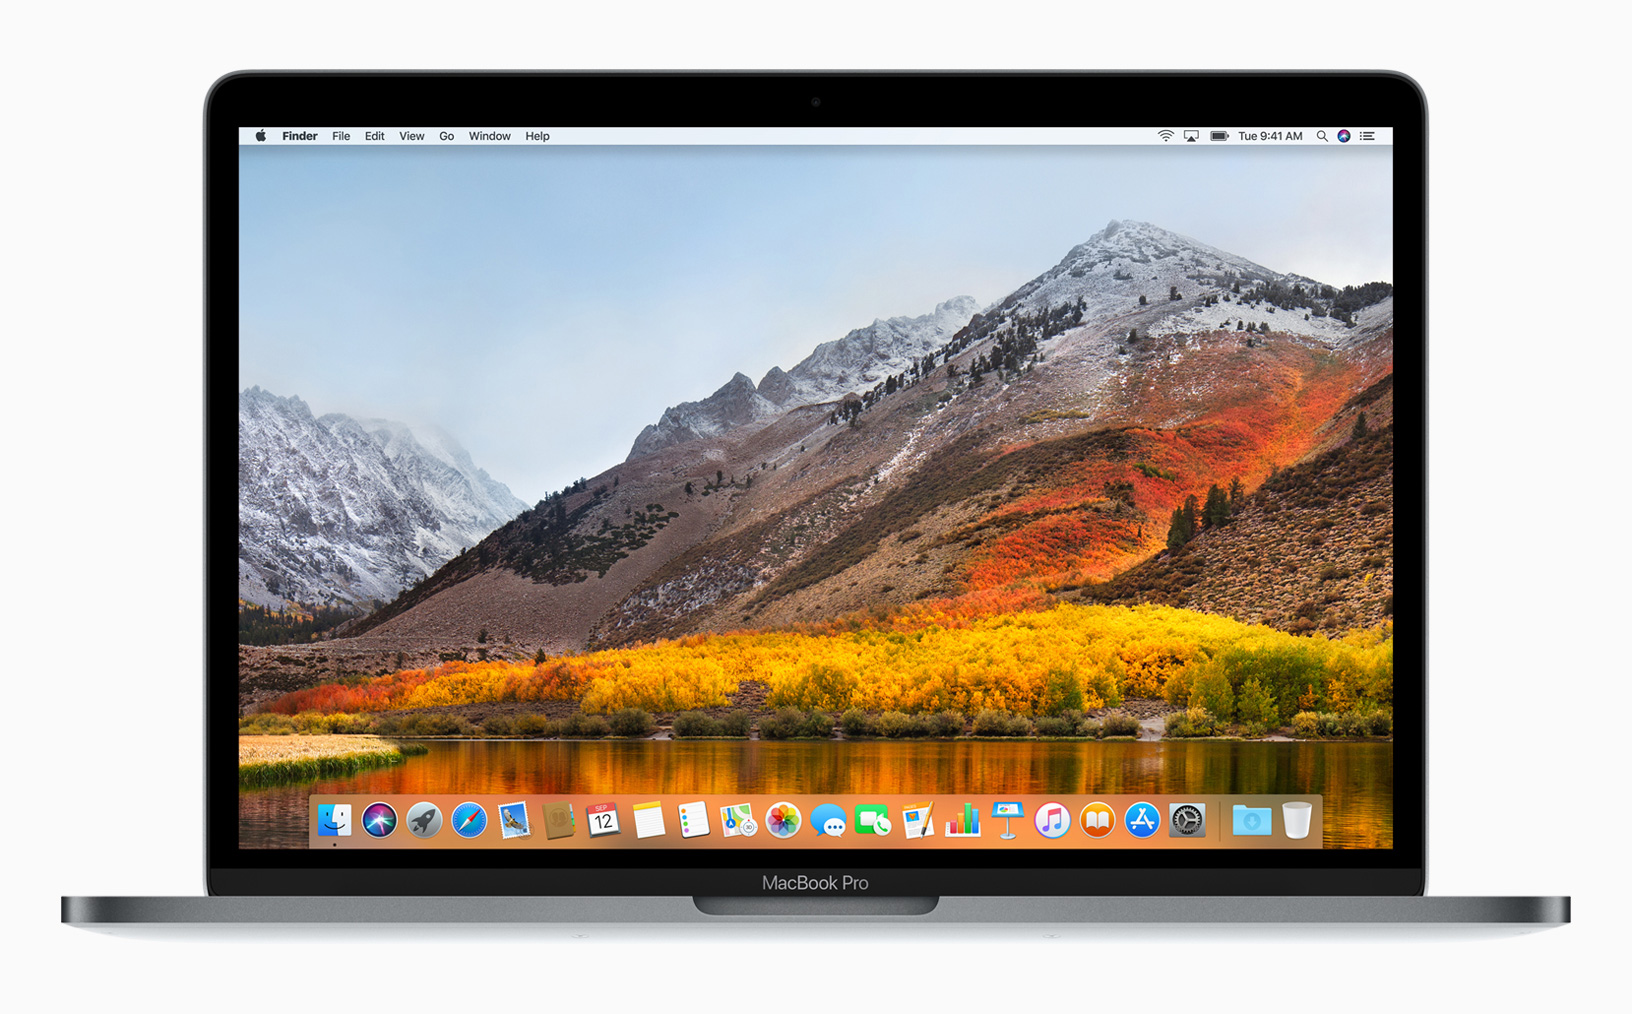 how to update mac air software to 10.13